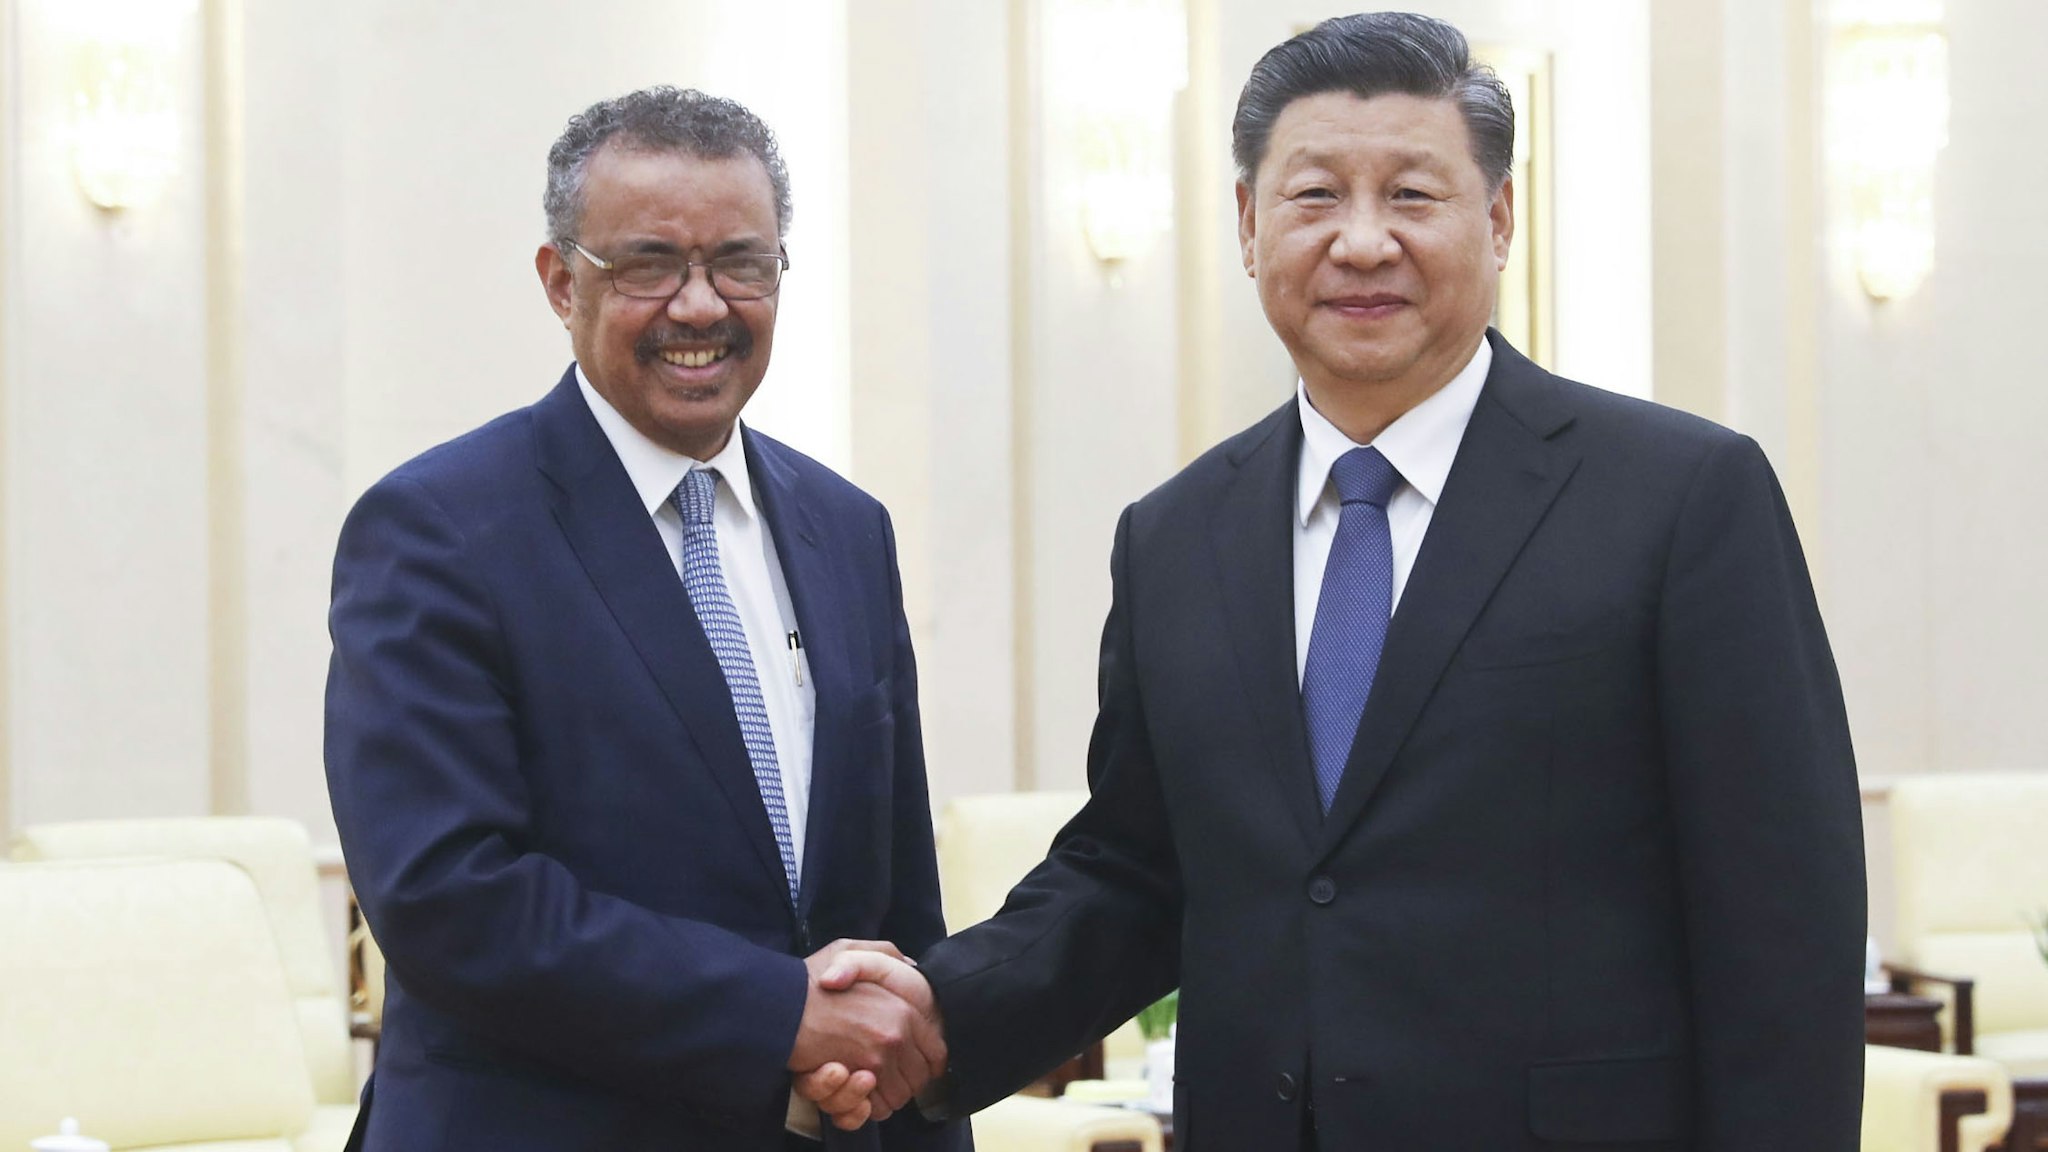 BEIJING, January. 28, 2020 -- Xi Jinping meets with visiting World Health Organization (WHO) Director-General Tedros Adhanom Ghebreyesus at the Great Hall of the People in Beijing, capital of China, Jan. 28, 2020. TO GO WITH "Xi Focus: Chronicle of Xi's leadership in China's war against coronavirus"